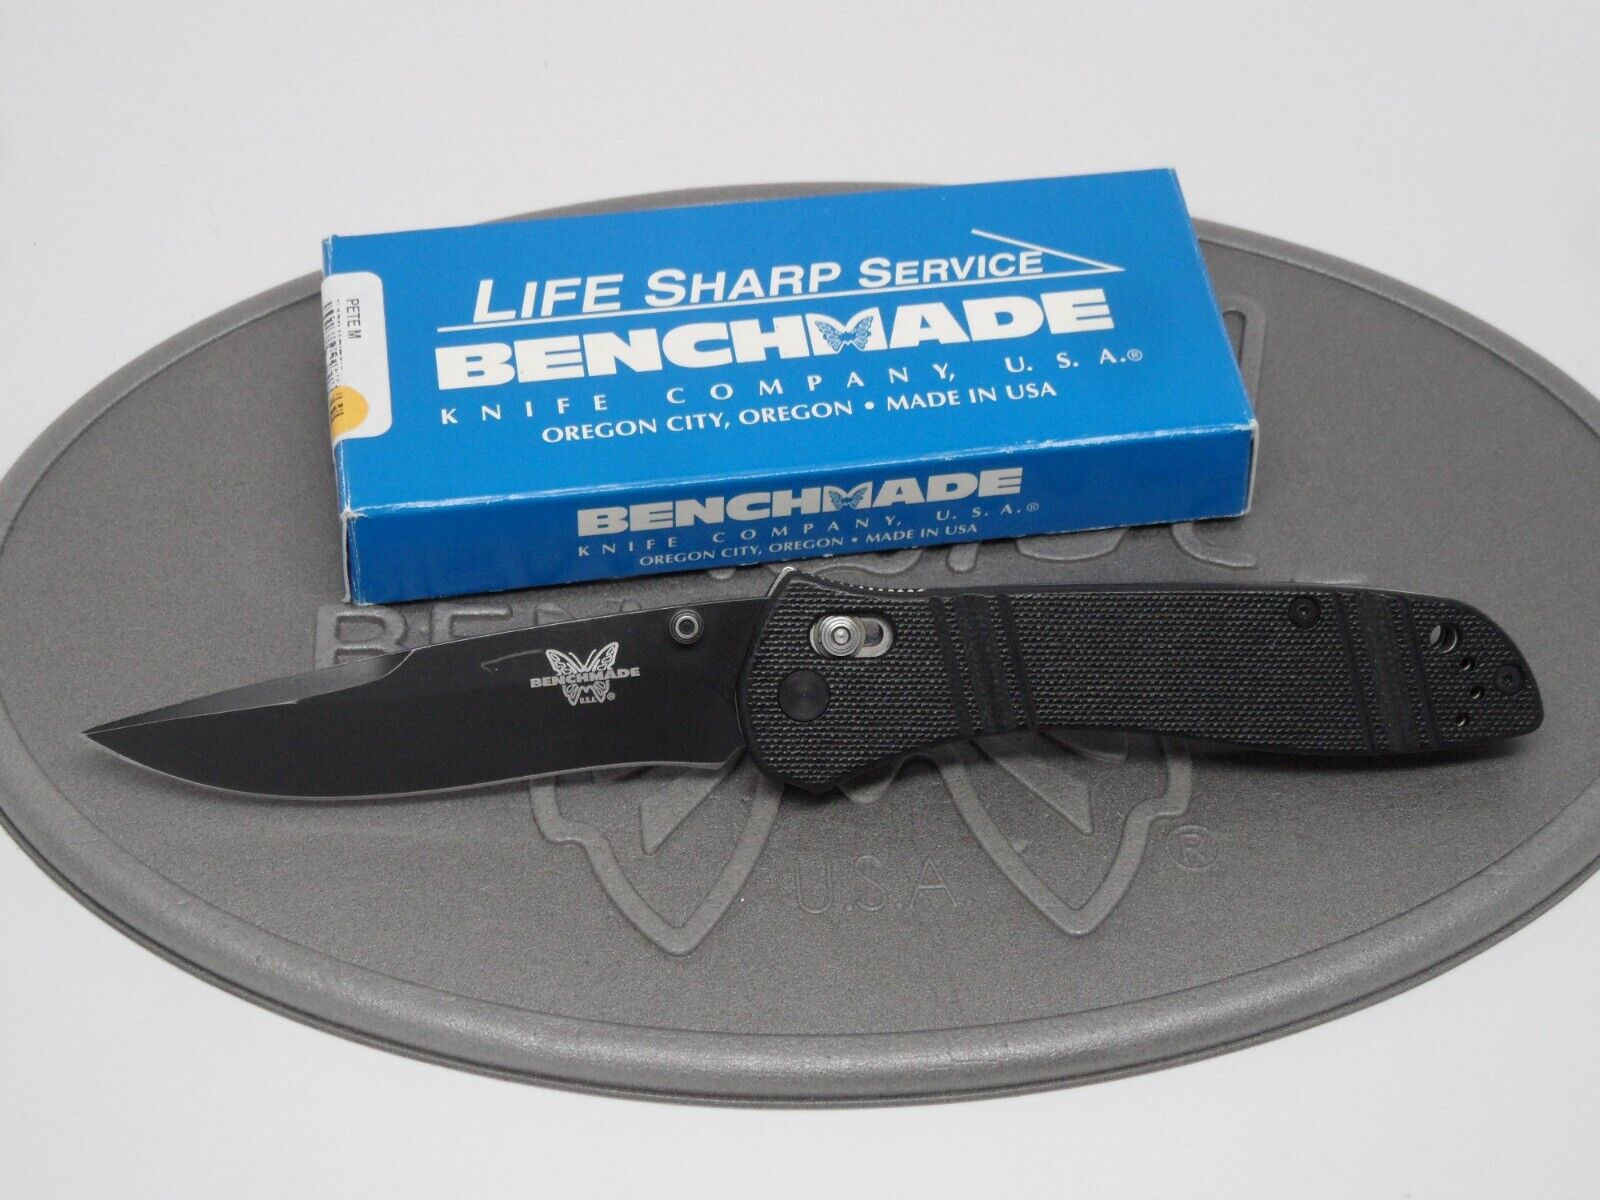 Vintage Benchmade 710BT McHenry & Williams Axis ATS-34 Black G10 Folding Knife